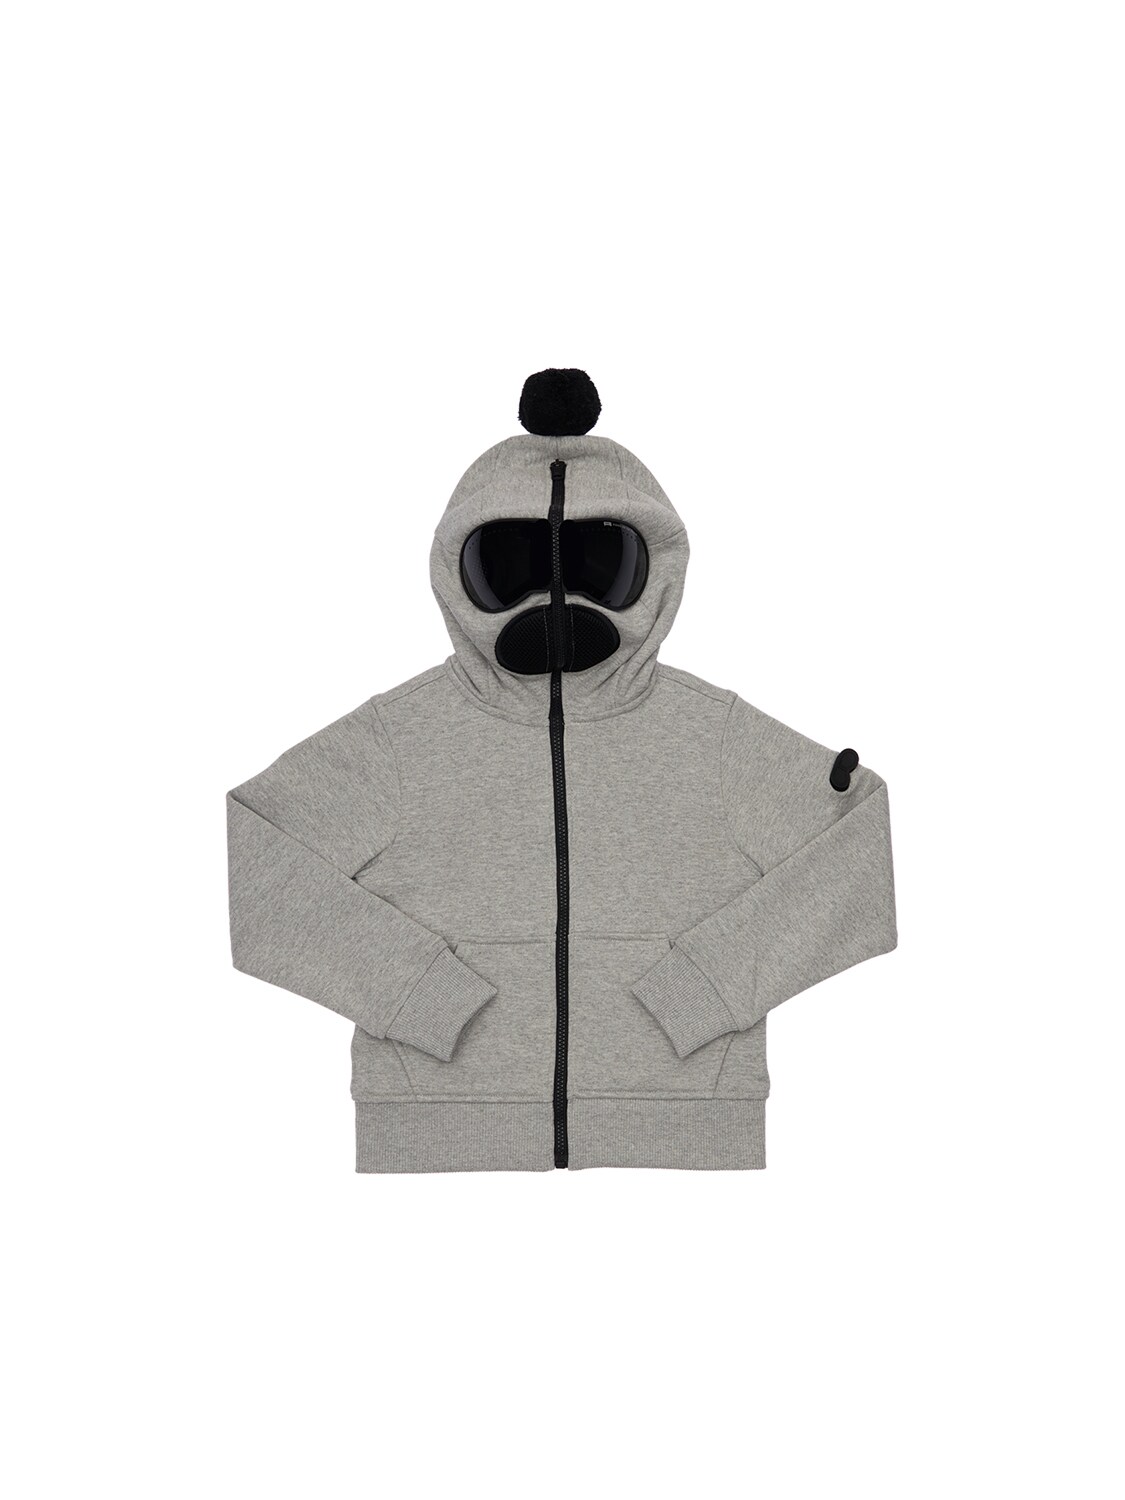 Ai Riders On The Storm Kids' Cotton Sweatshirt Hoodie W/ Lenses In Grey